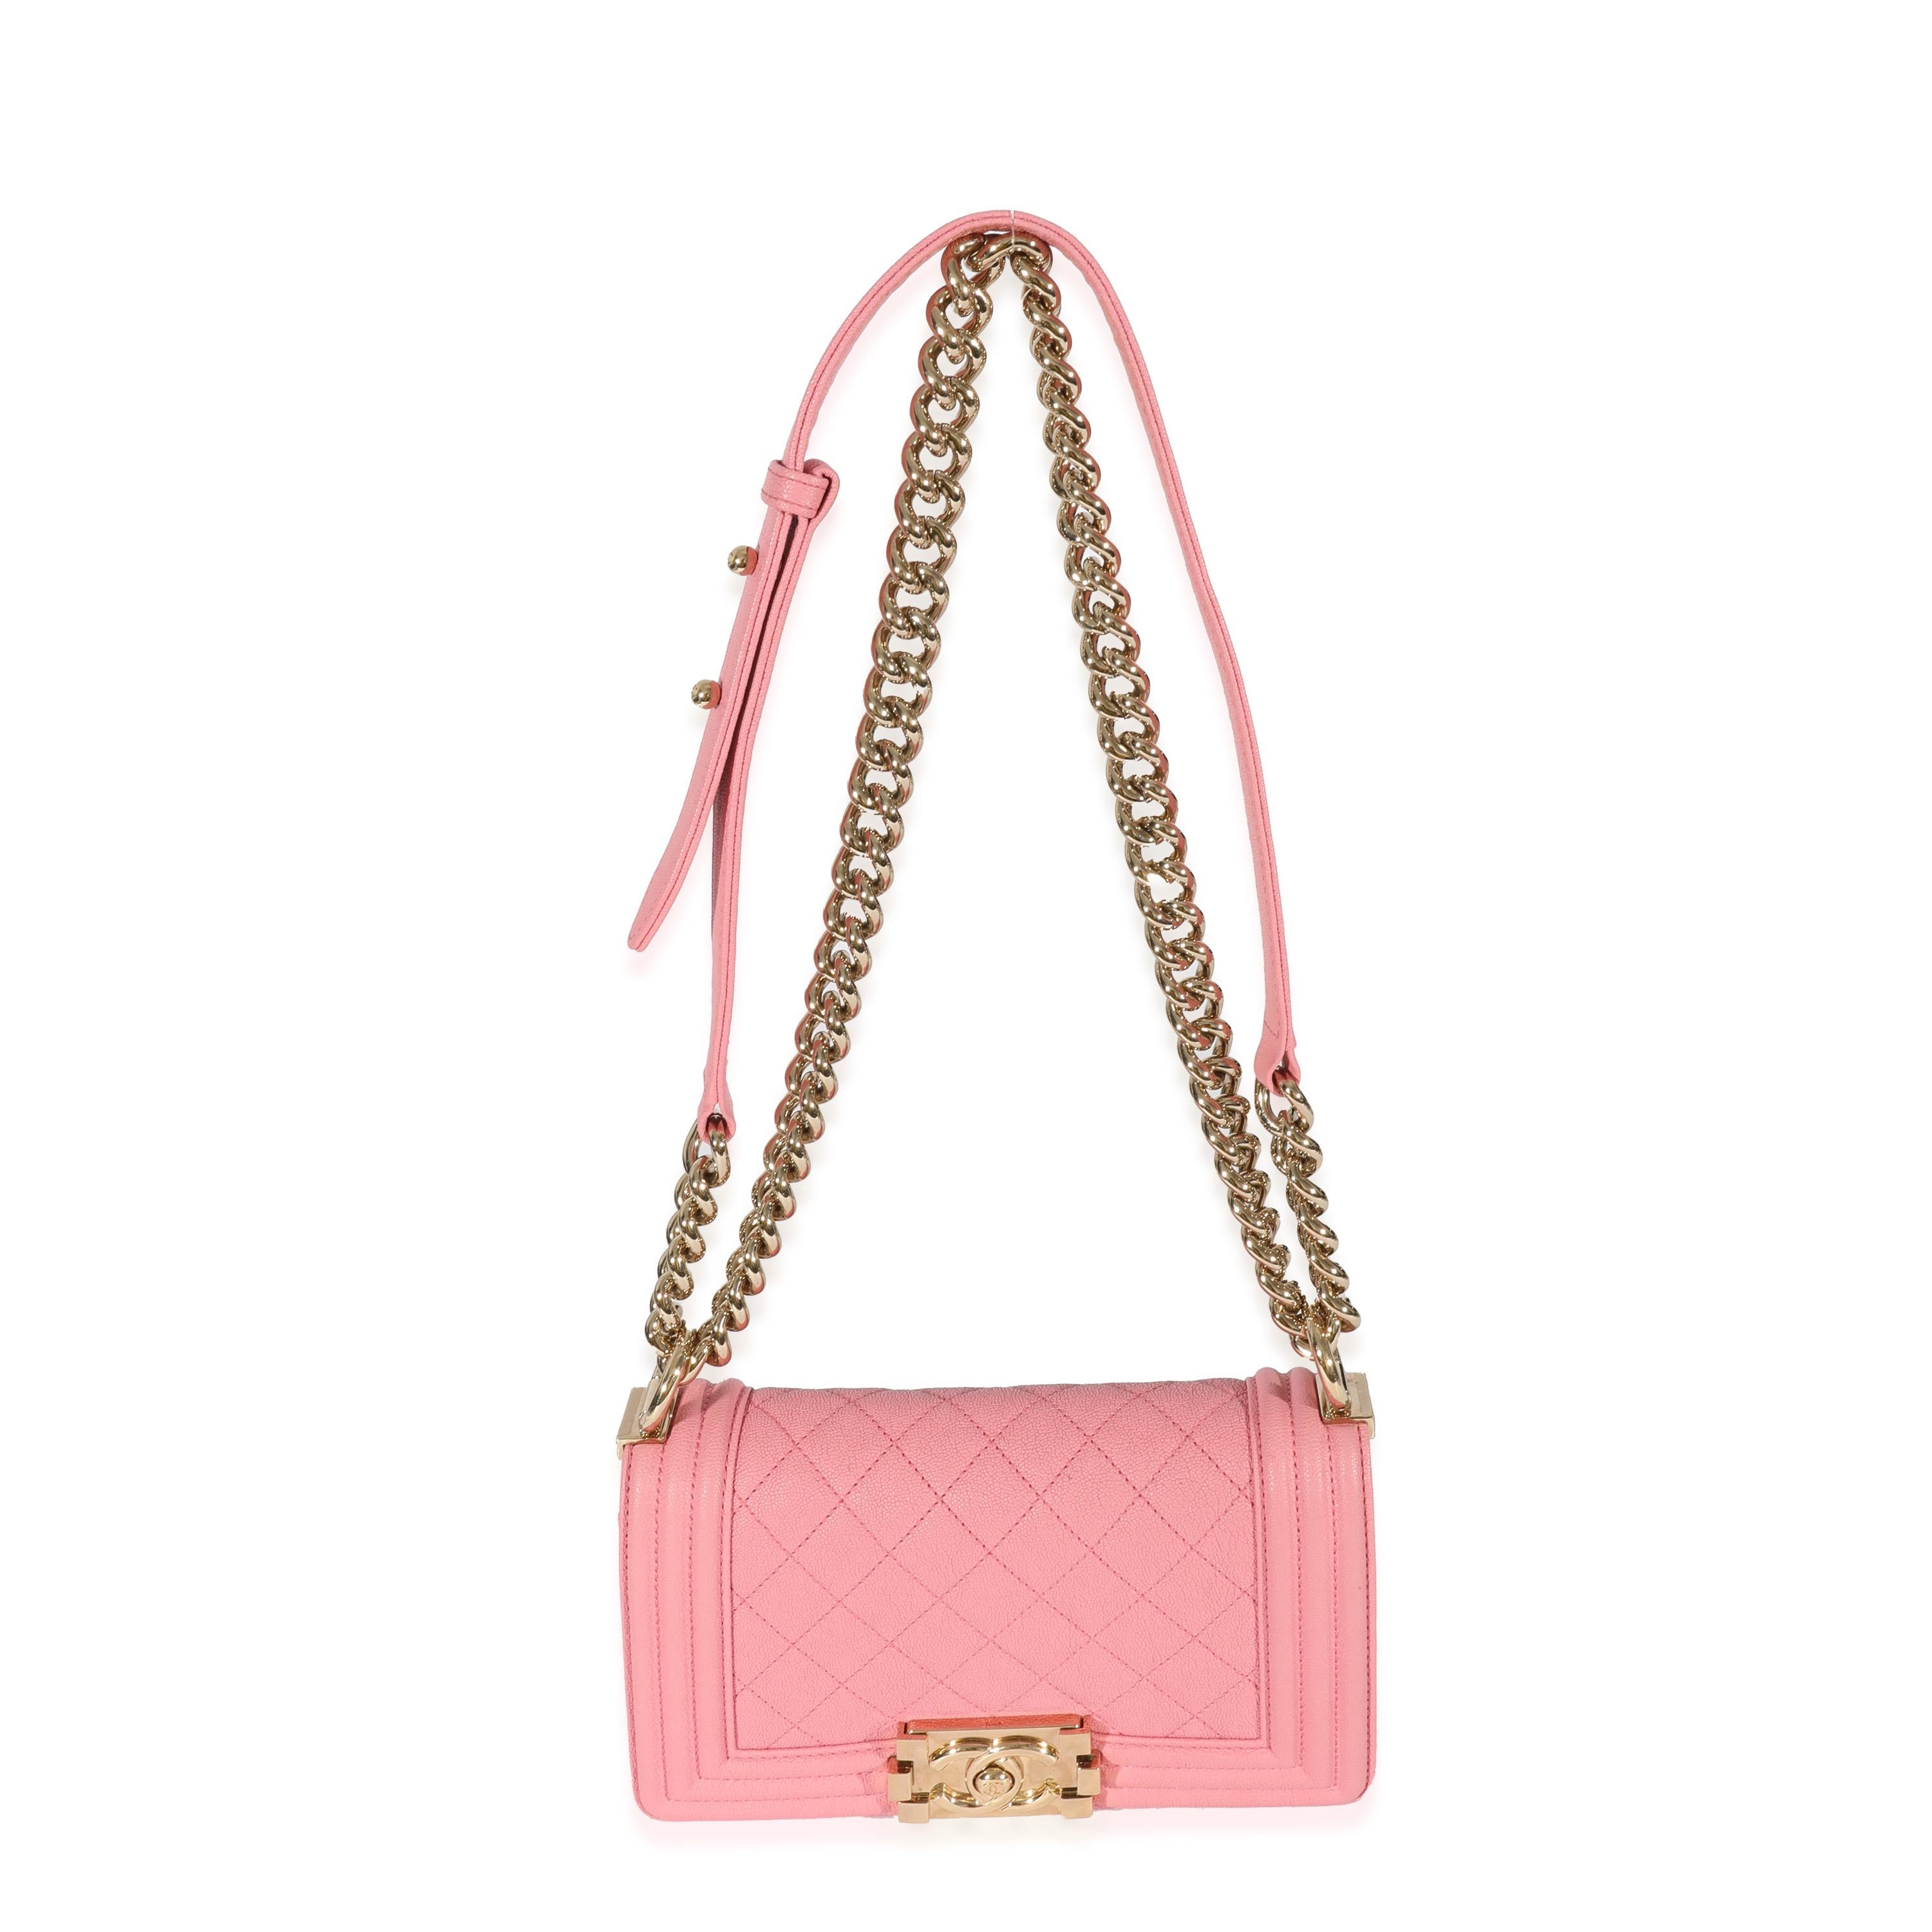 Listing Title: Chanel Pink Caviar Small Boy Bag
 SKU: 128592
 Condition: Pre-owned 
 Condition Description: An instant classic, the Boy bag from Chanel was introduced in 2011. The quilted bag was designed by the late Karl Lagerfeld, who was inspired